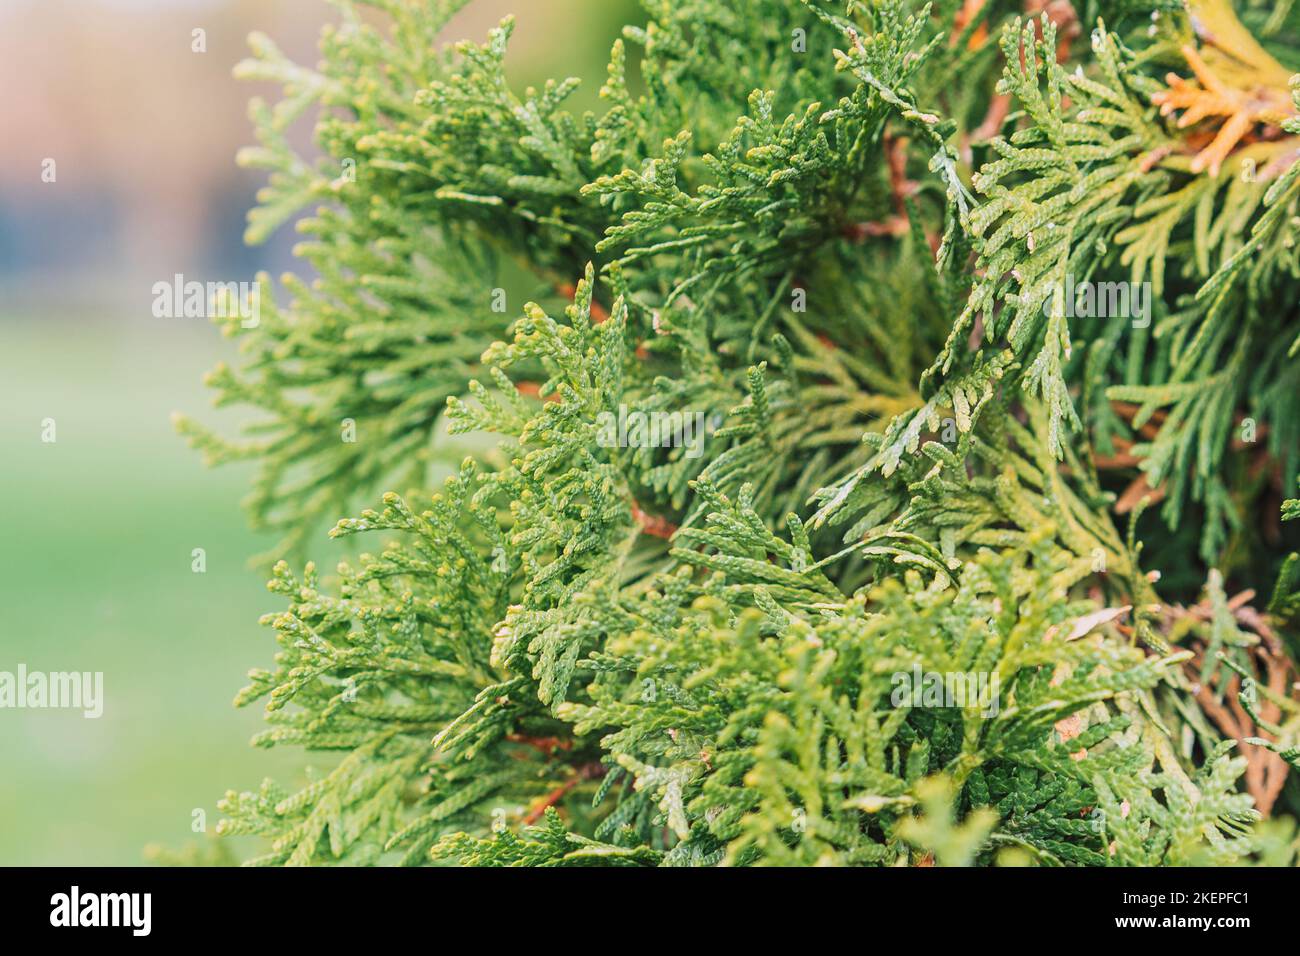 Outside background close-up of thuja twigs in green color Stock Photo